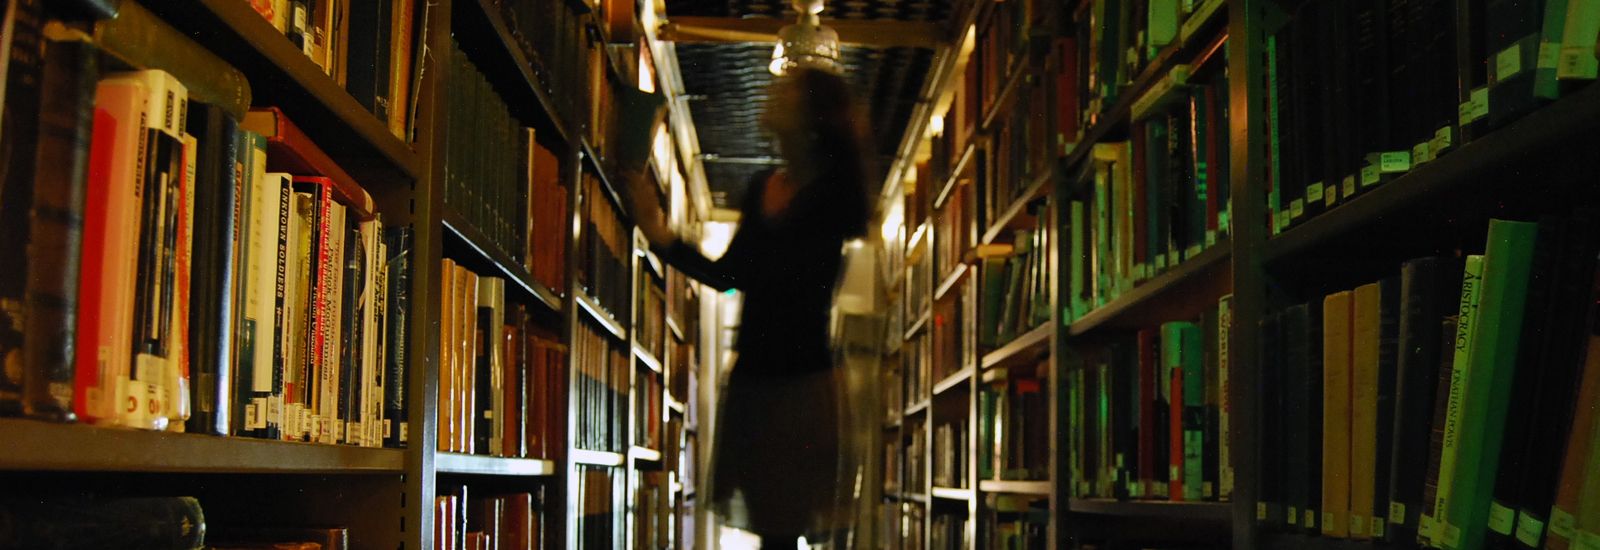 A student standing on a stool in a library